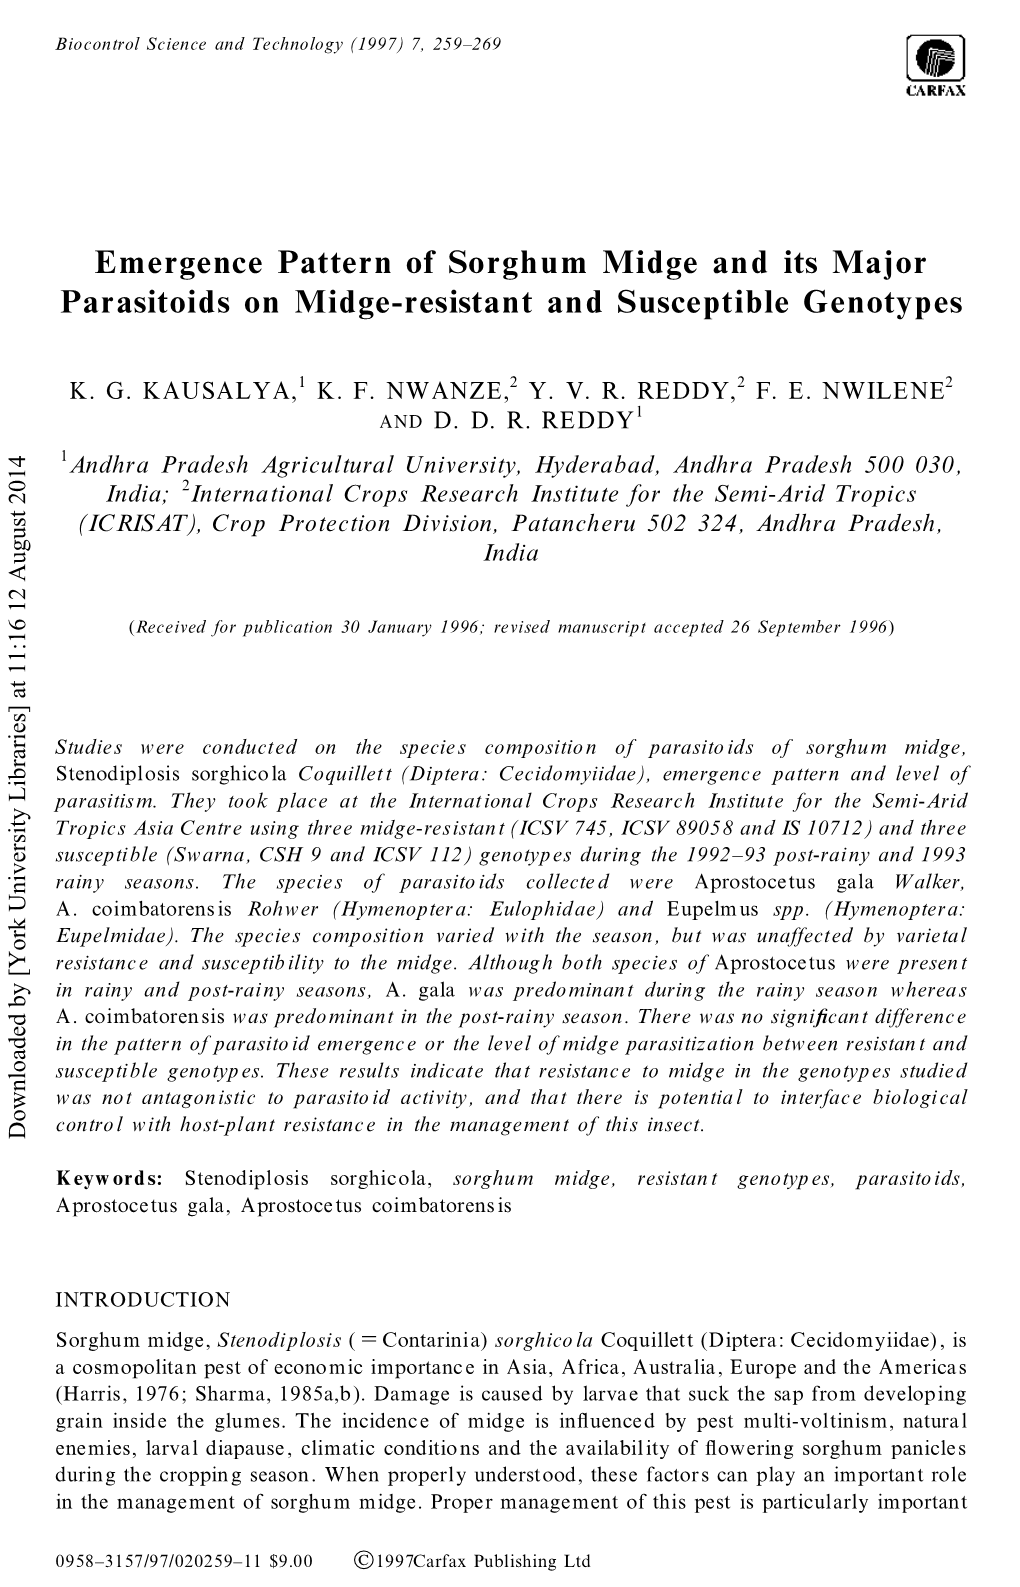 Emergence Pattern of Sorghum Midge and Its Major Parasitoids on Midge-Resistant and Susceptible Genotypes